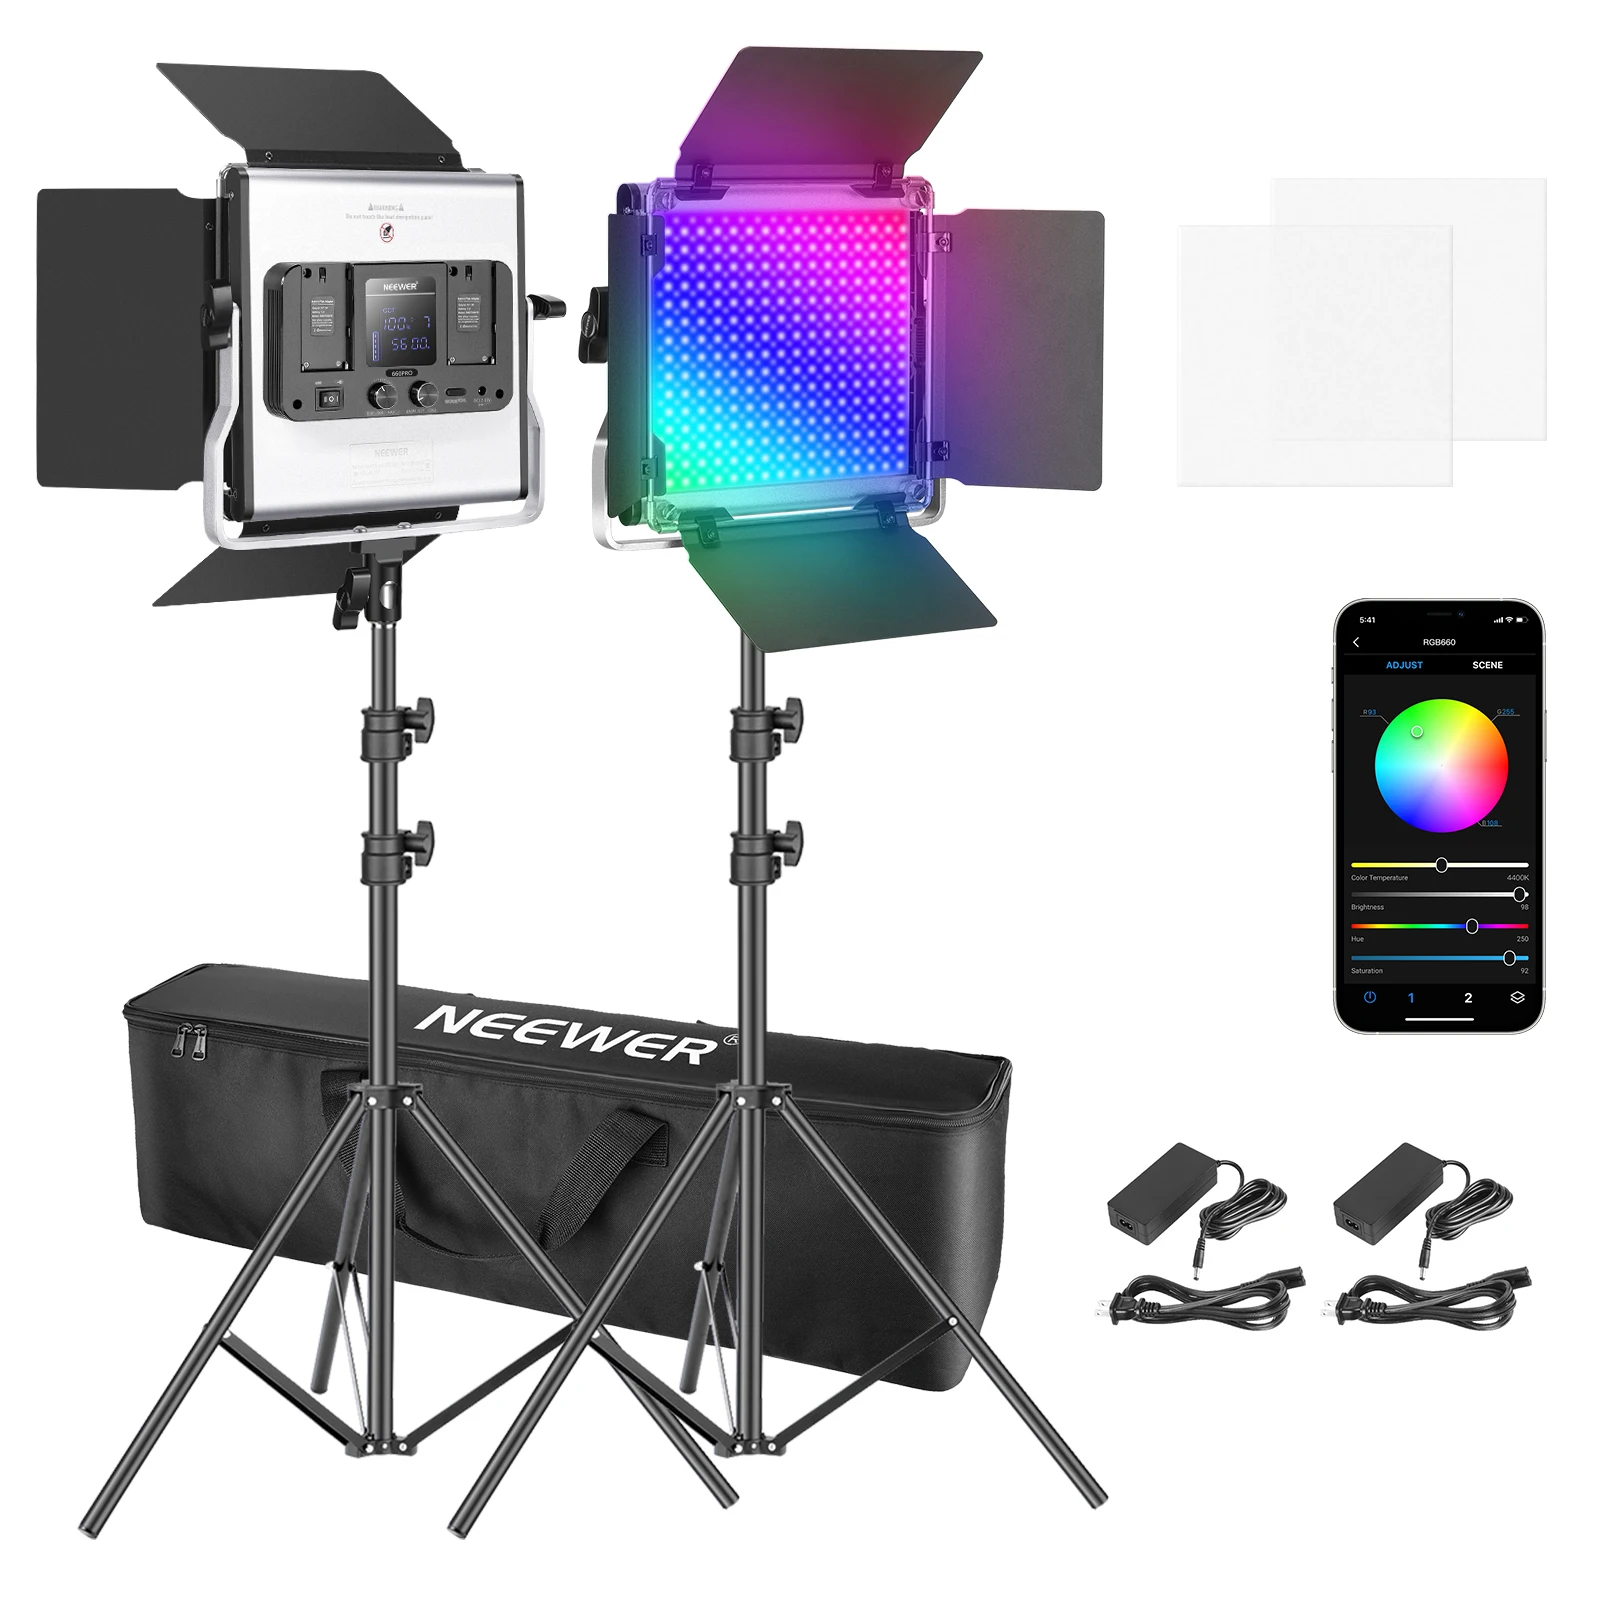 

Neewer 2 or 3 Packs 660 RGB Led Light with APP Control, Photography Video Lighting Kit with Stands and Bag, 660 SMD LEDs CRI95